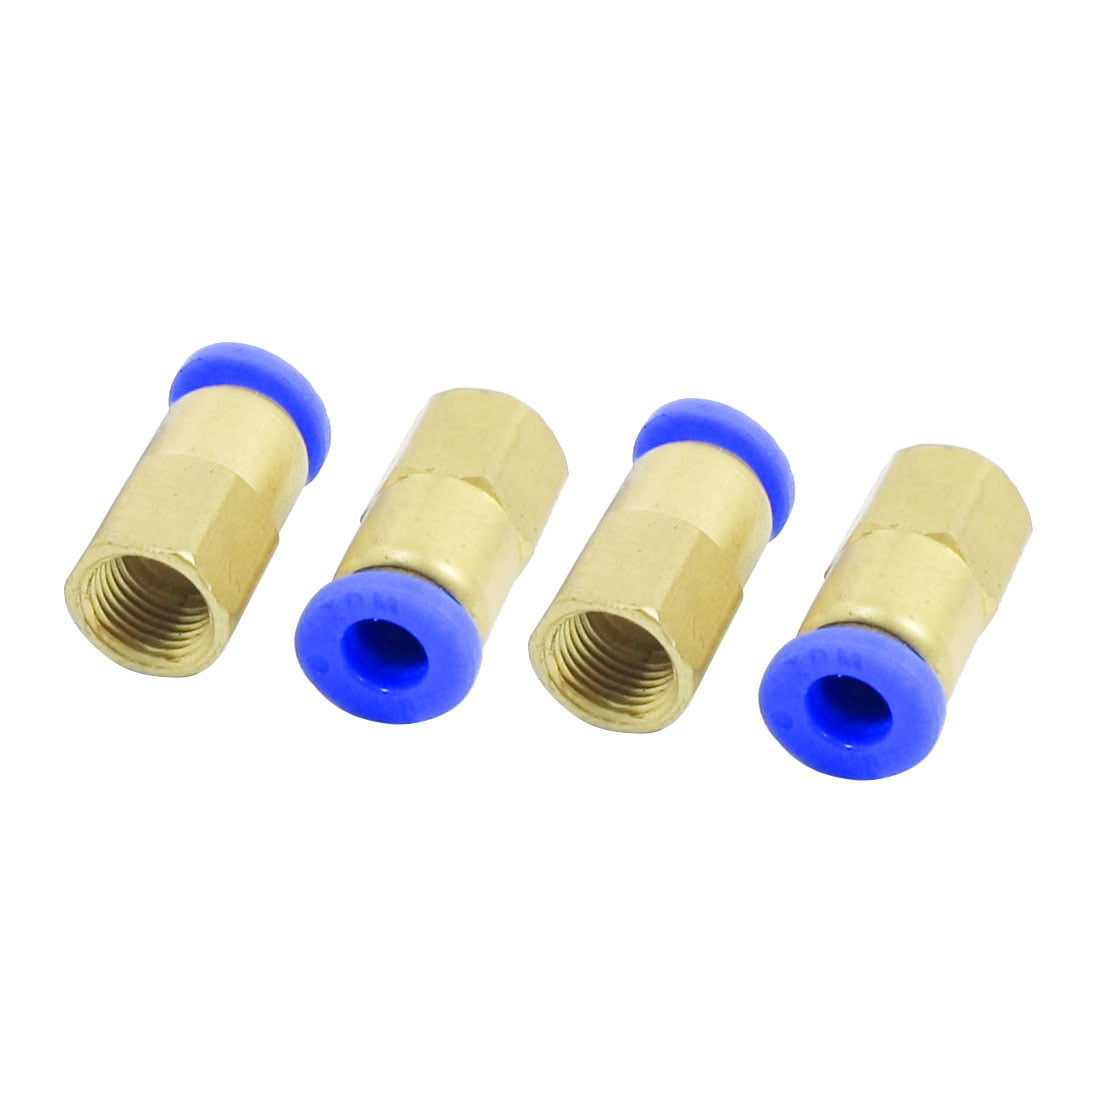 Tube OD 8mm x 3/8BSP Push In Quick Release Air Fitting Connector 5pcs 